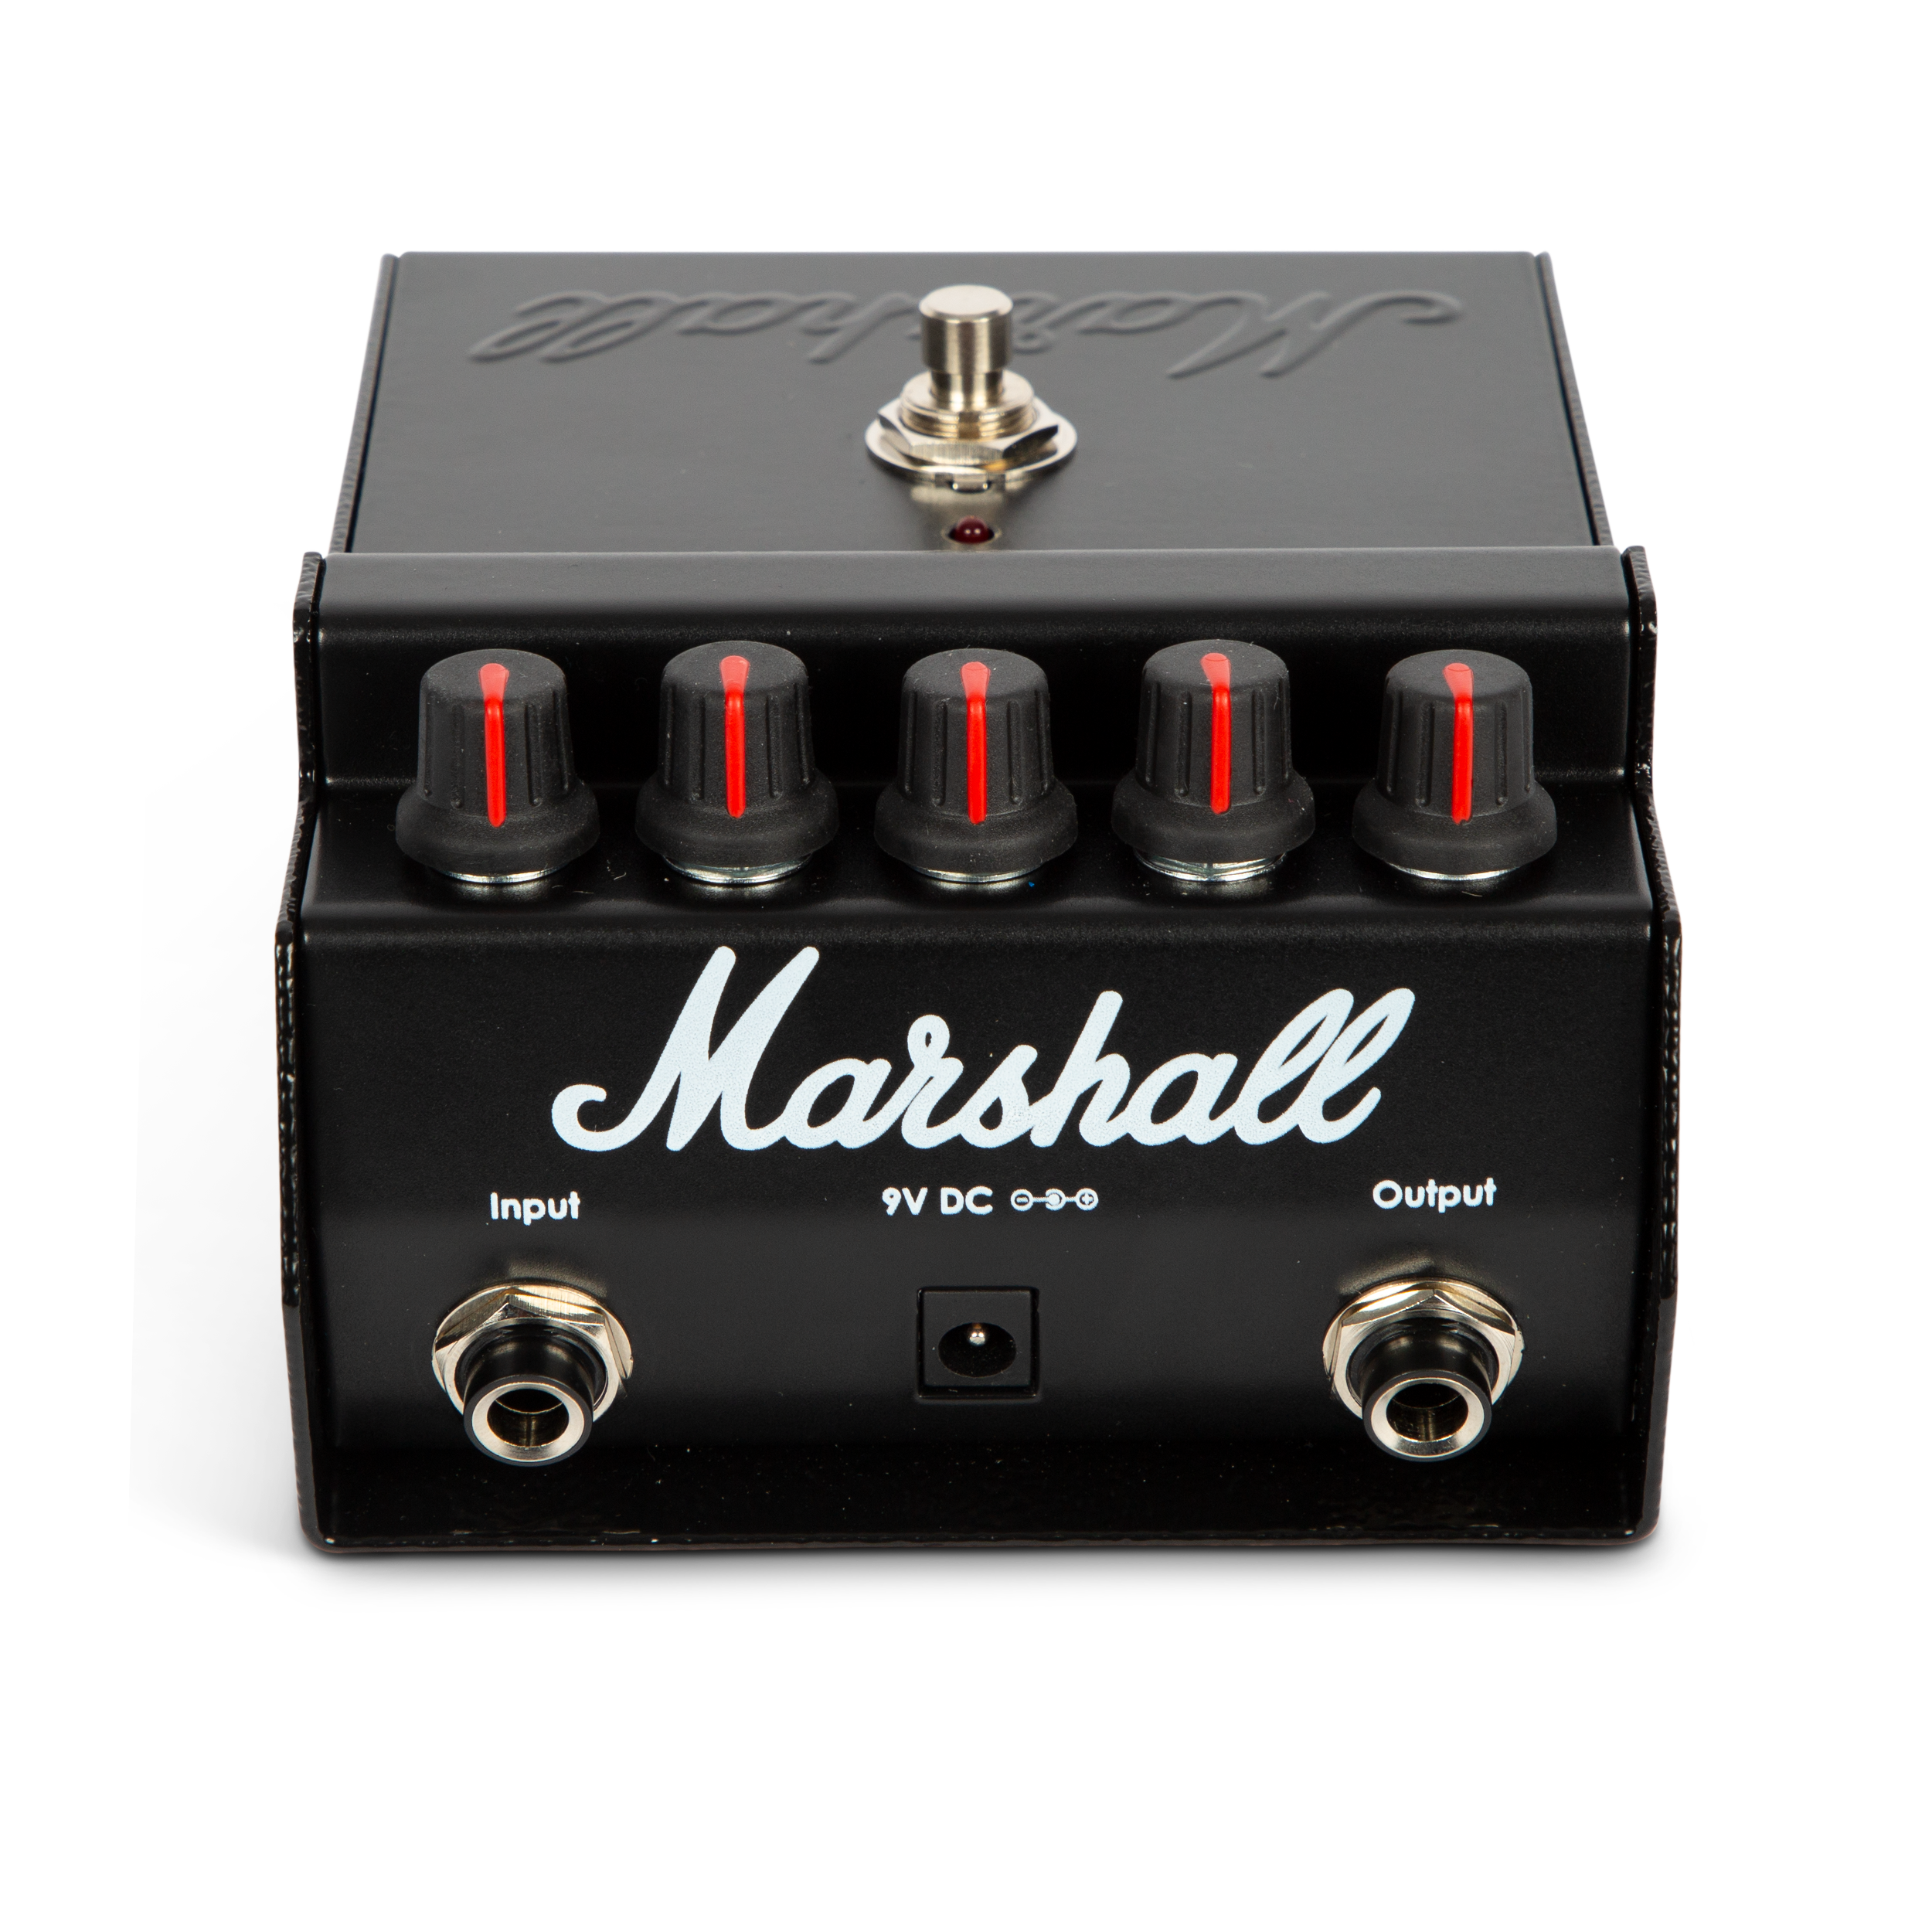 MARSHALL LIMITED EDITION DRIVEMASTER REISSUE PEDAL MADE IN THE UK PEDL00103